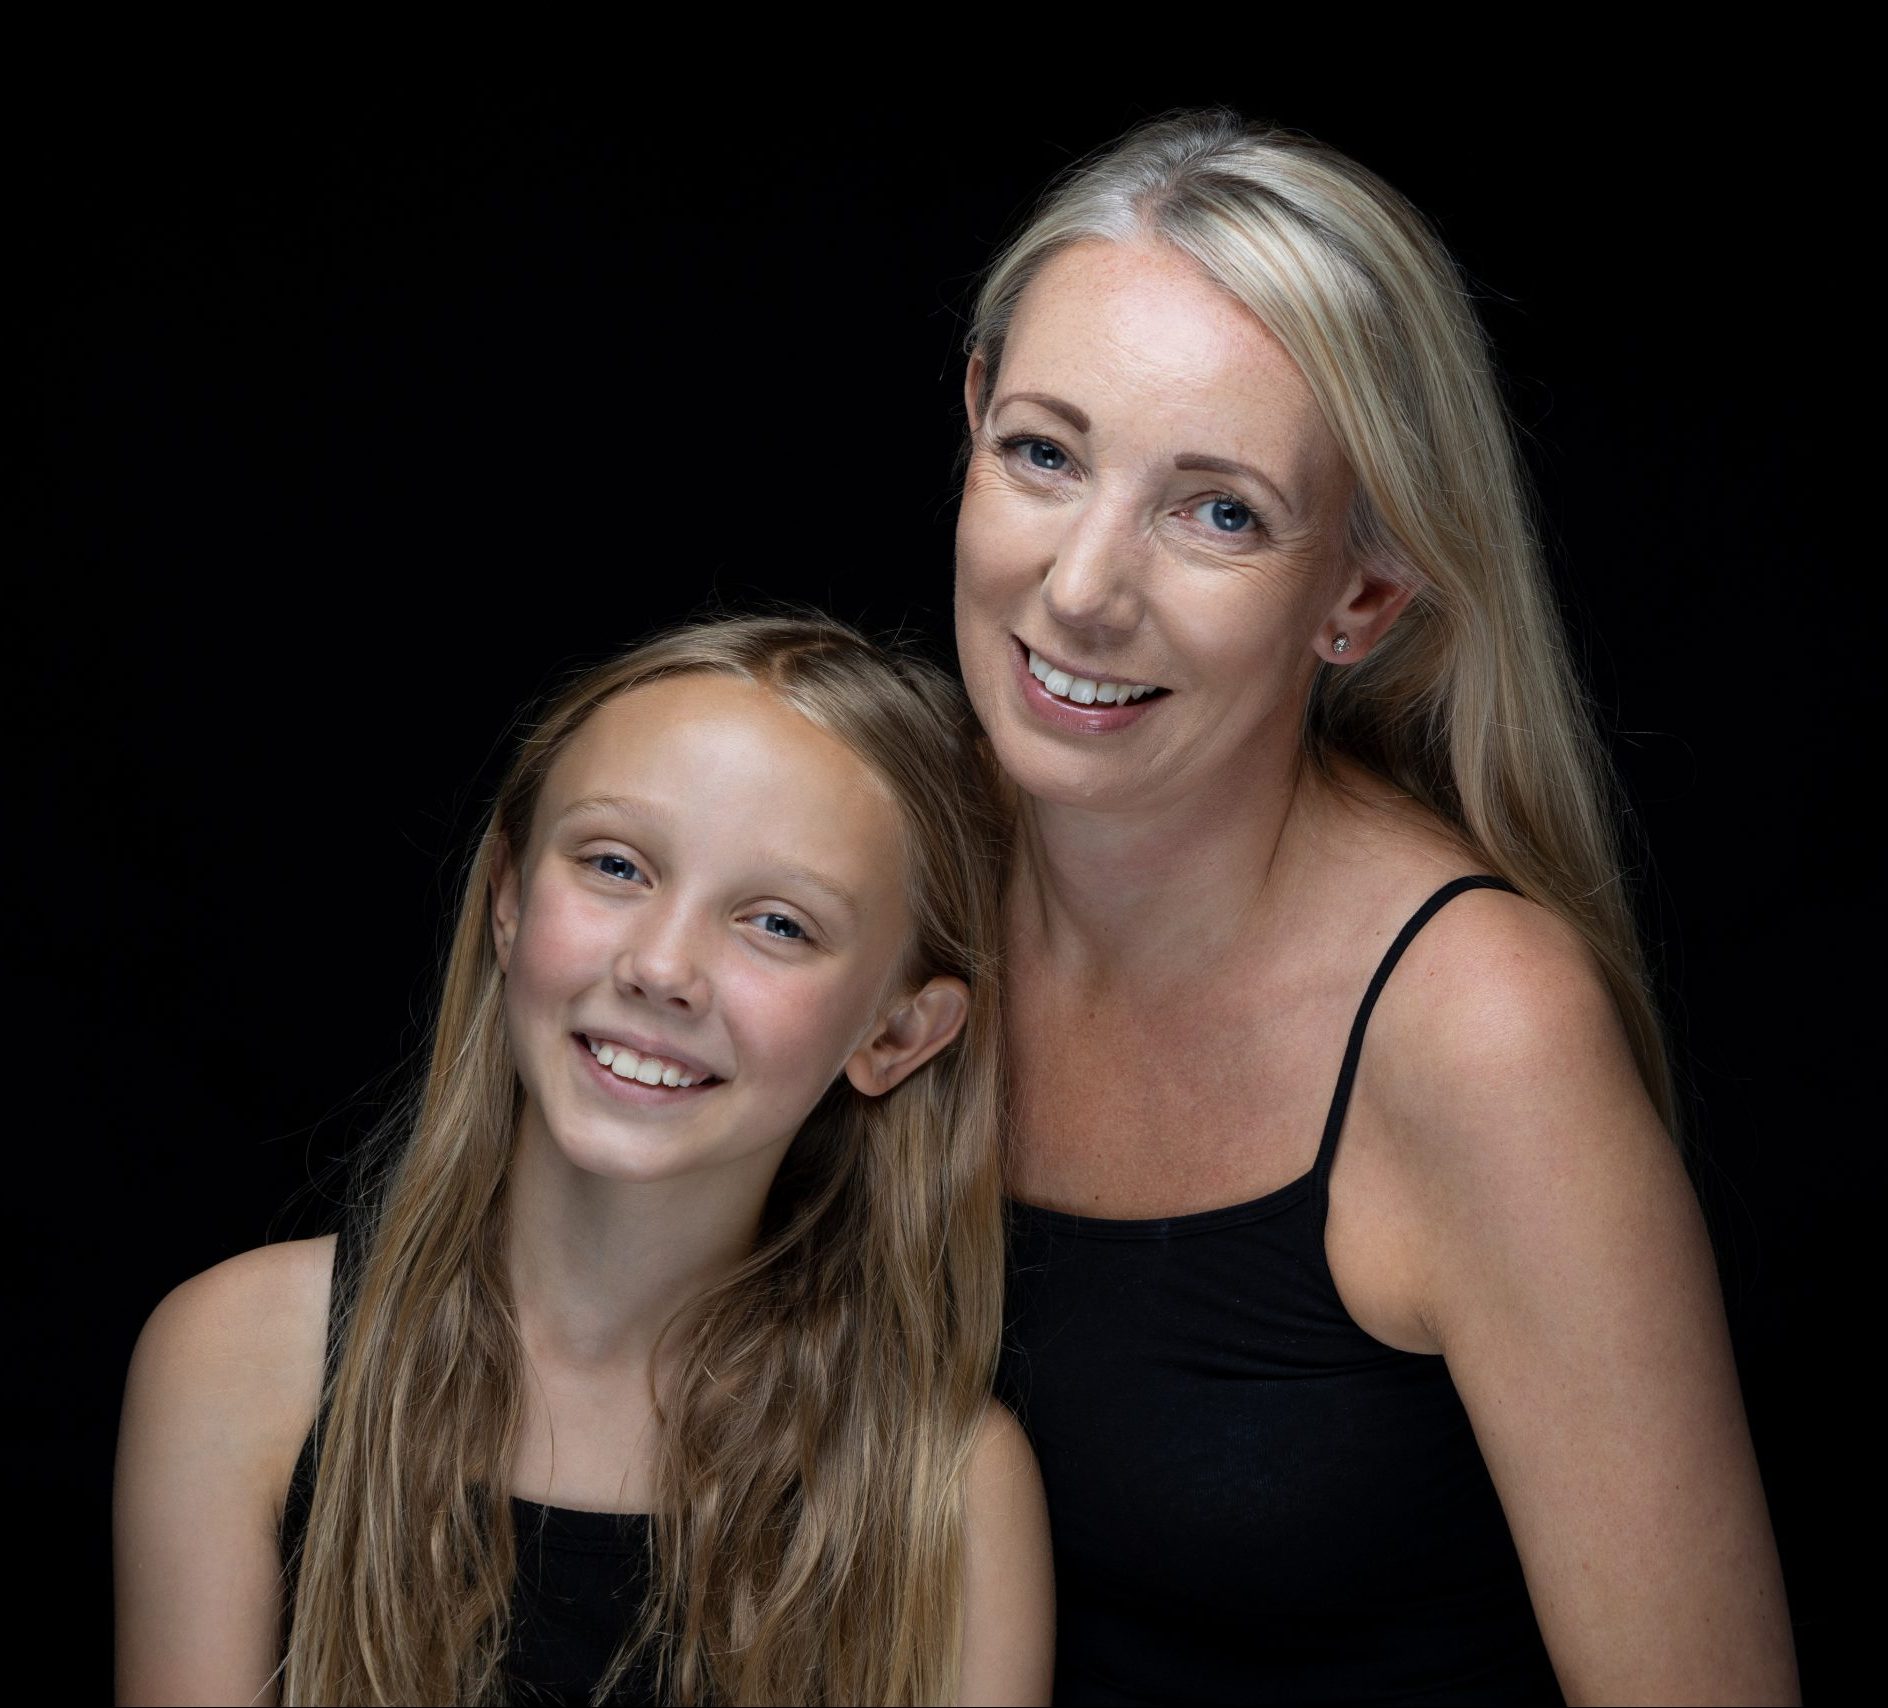 Mother and daughter smiling in black clothing against a black background